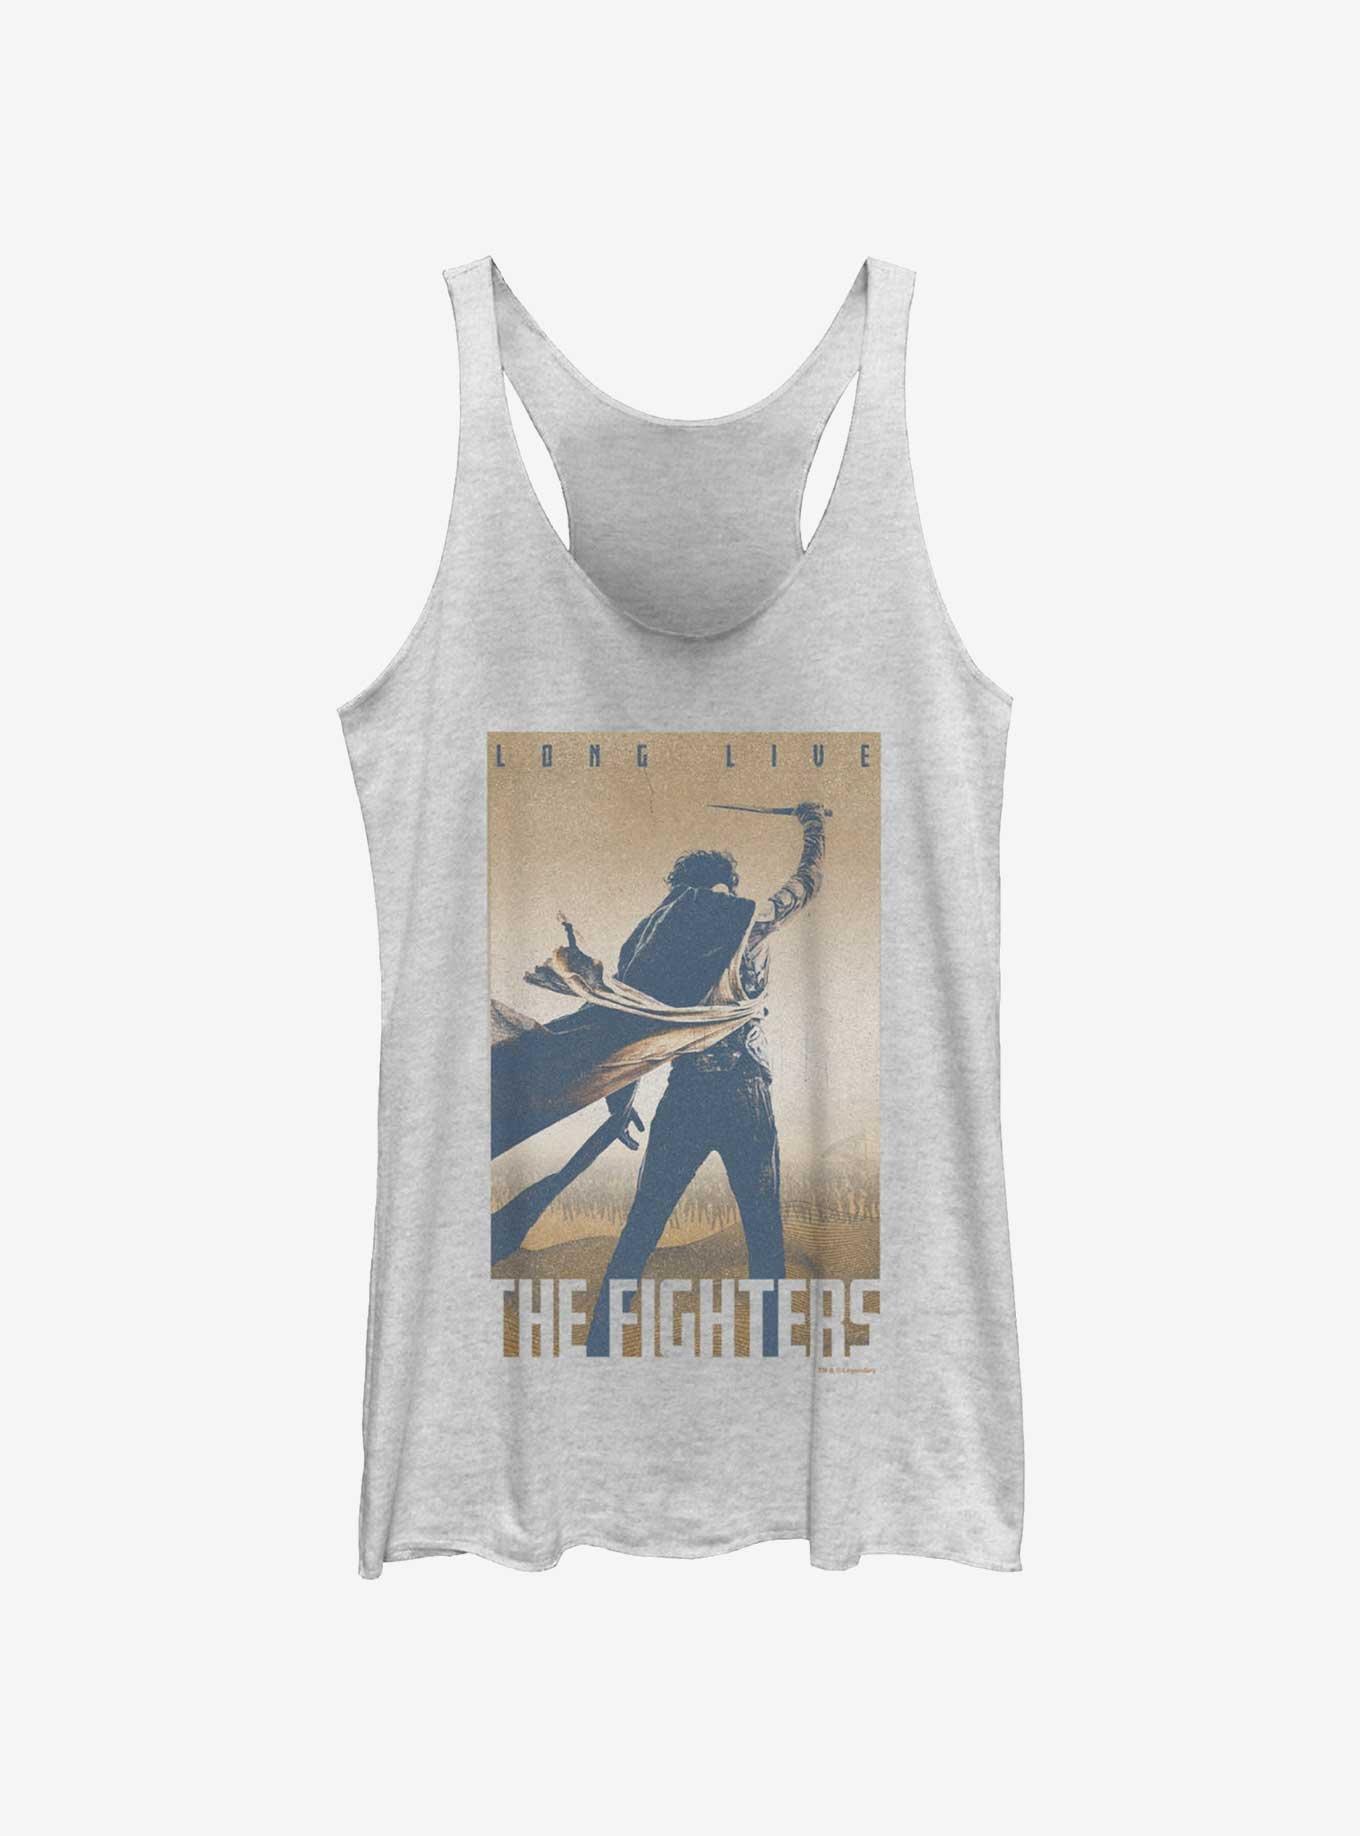 Dune: Part Two Long Live The Fighters Girls Tank, WHITE HTR, hi-res